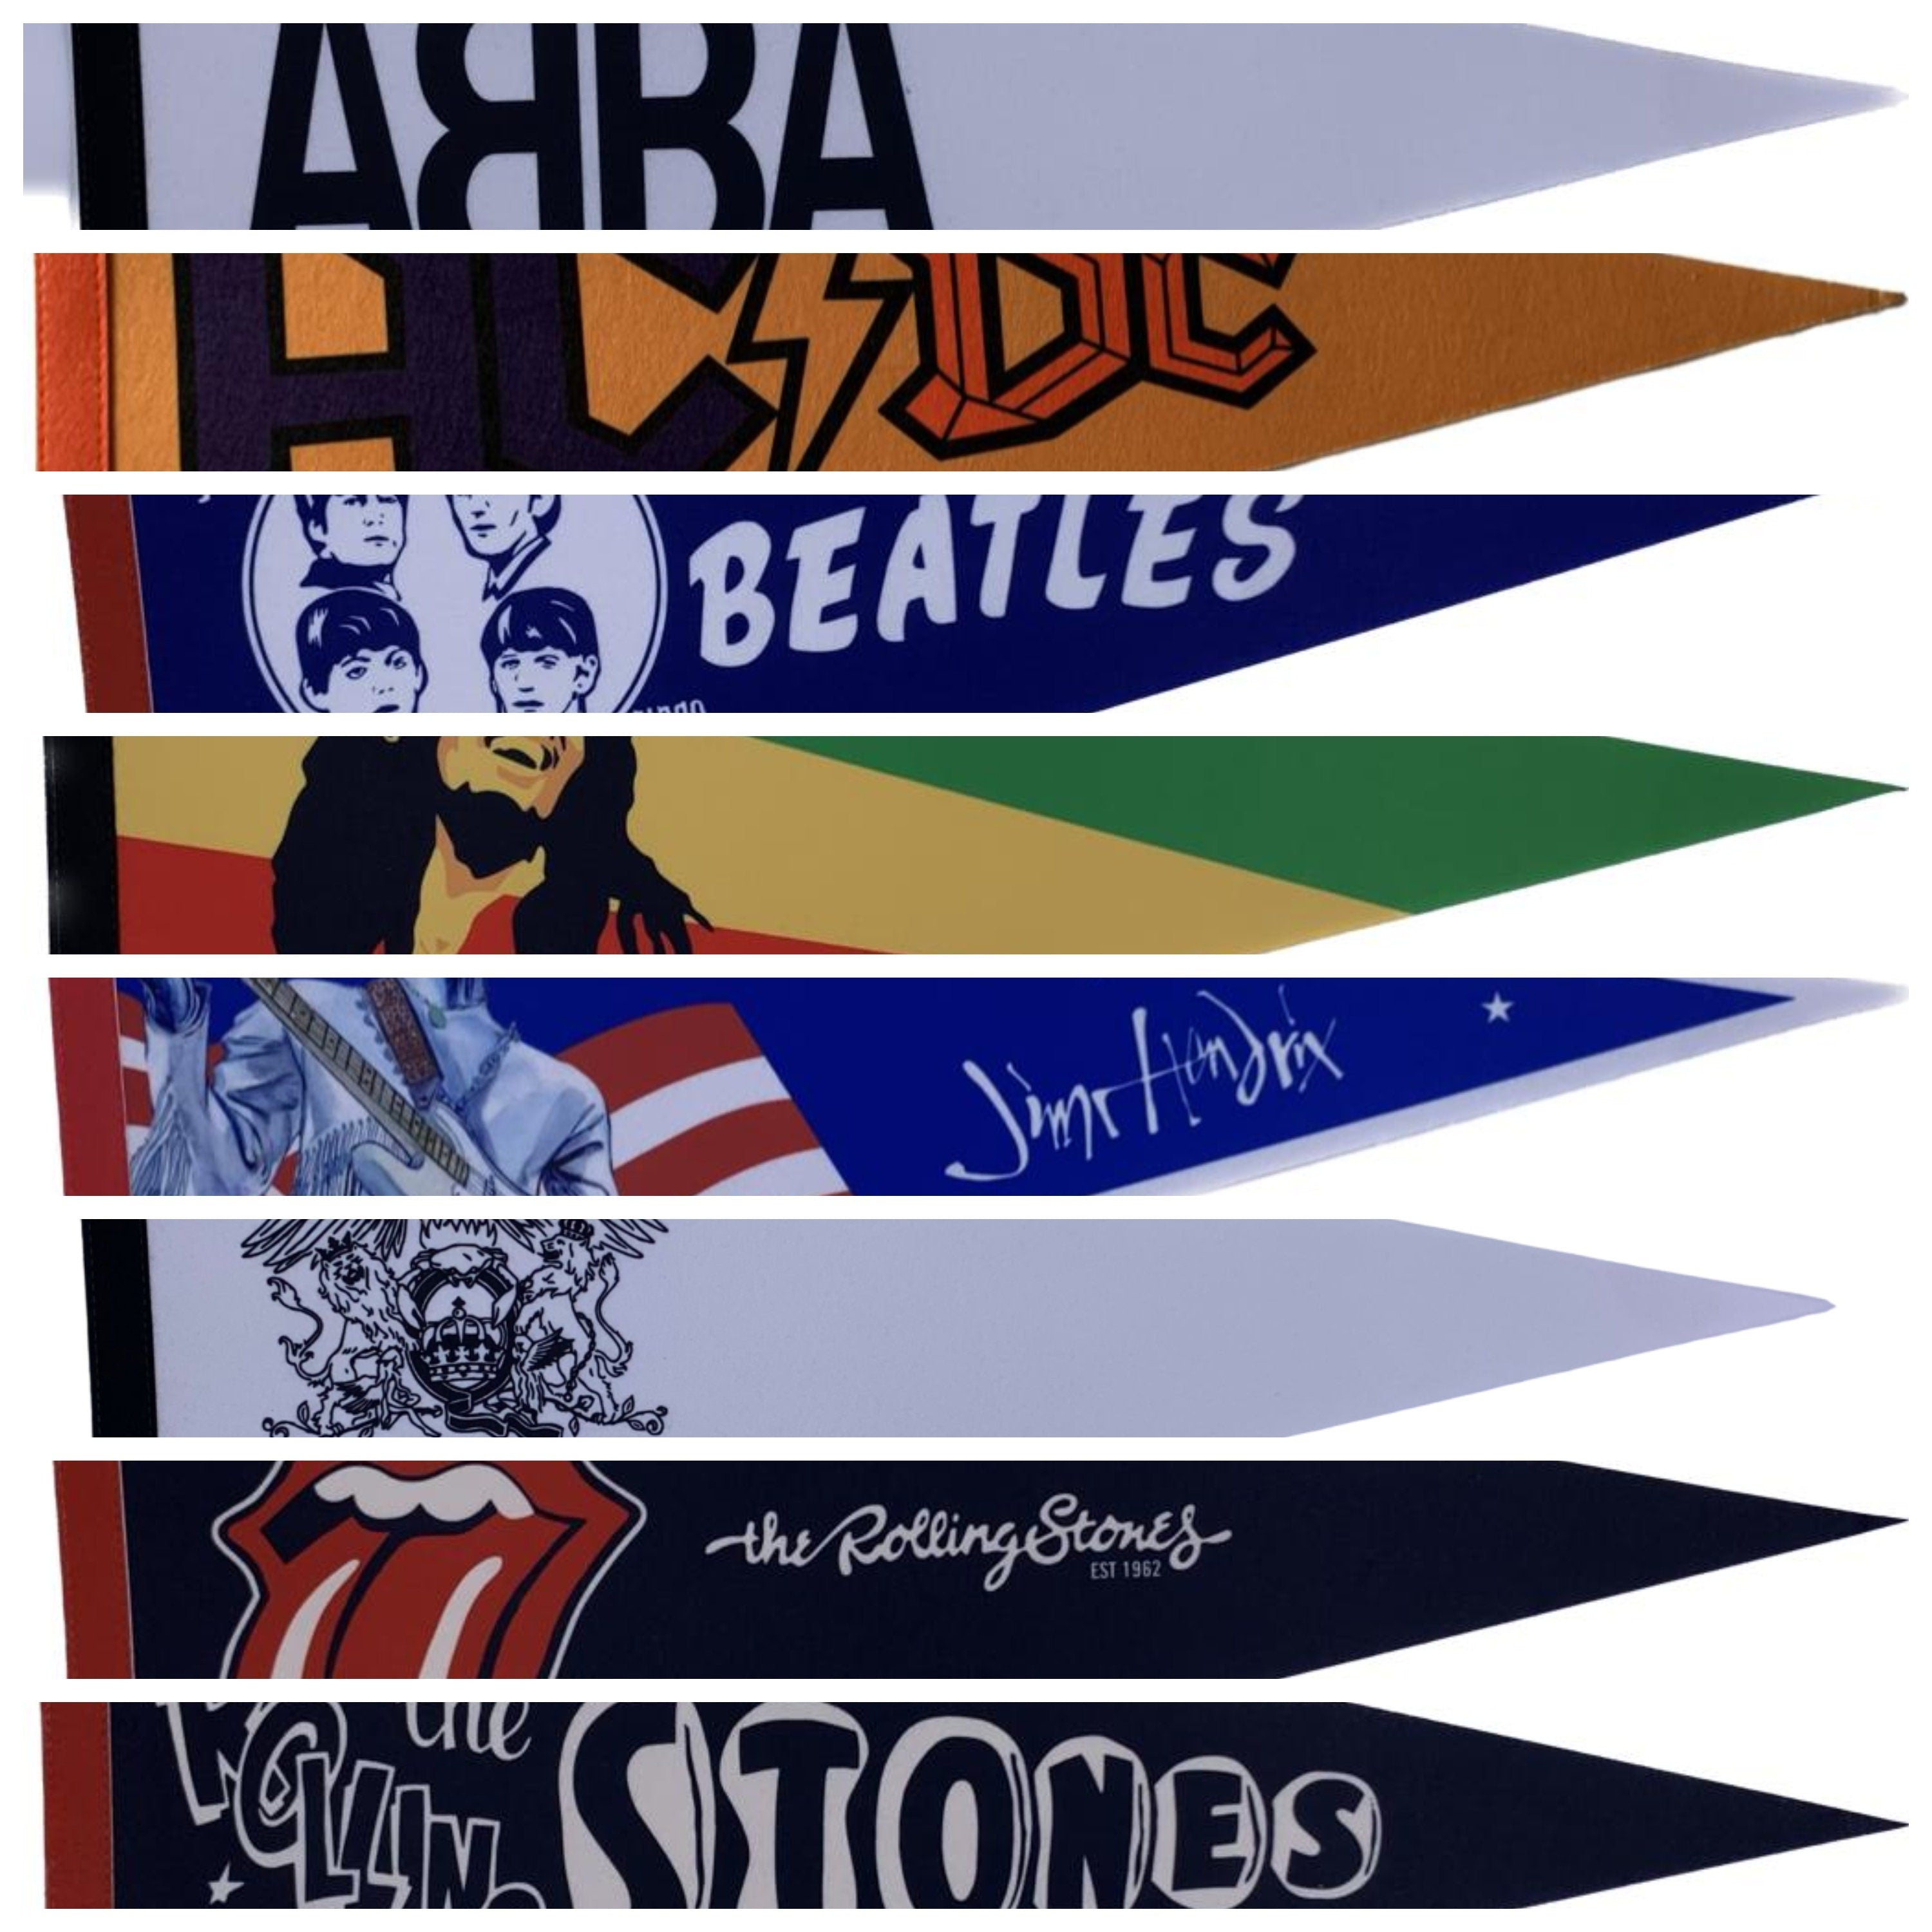 The Rolling Stones pennant Music collectibles vintage pennants vaantje vlag vaantje fanion pennant flag rock music finds wall decor stones - Black